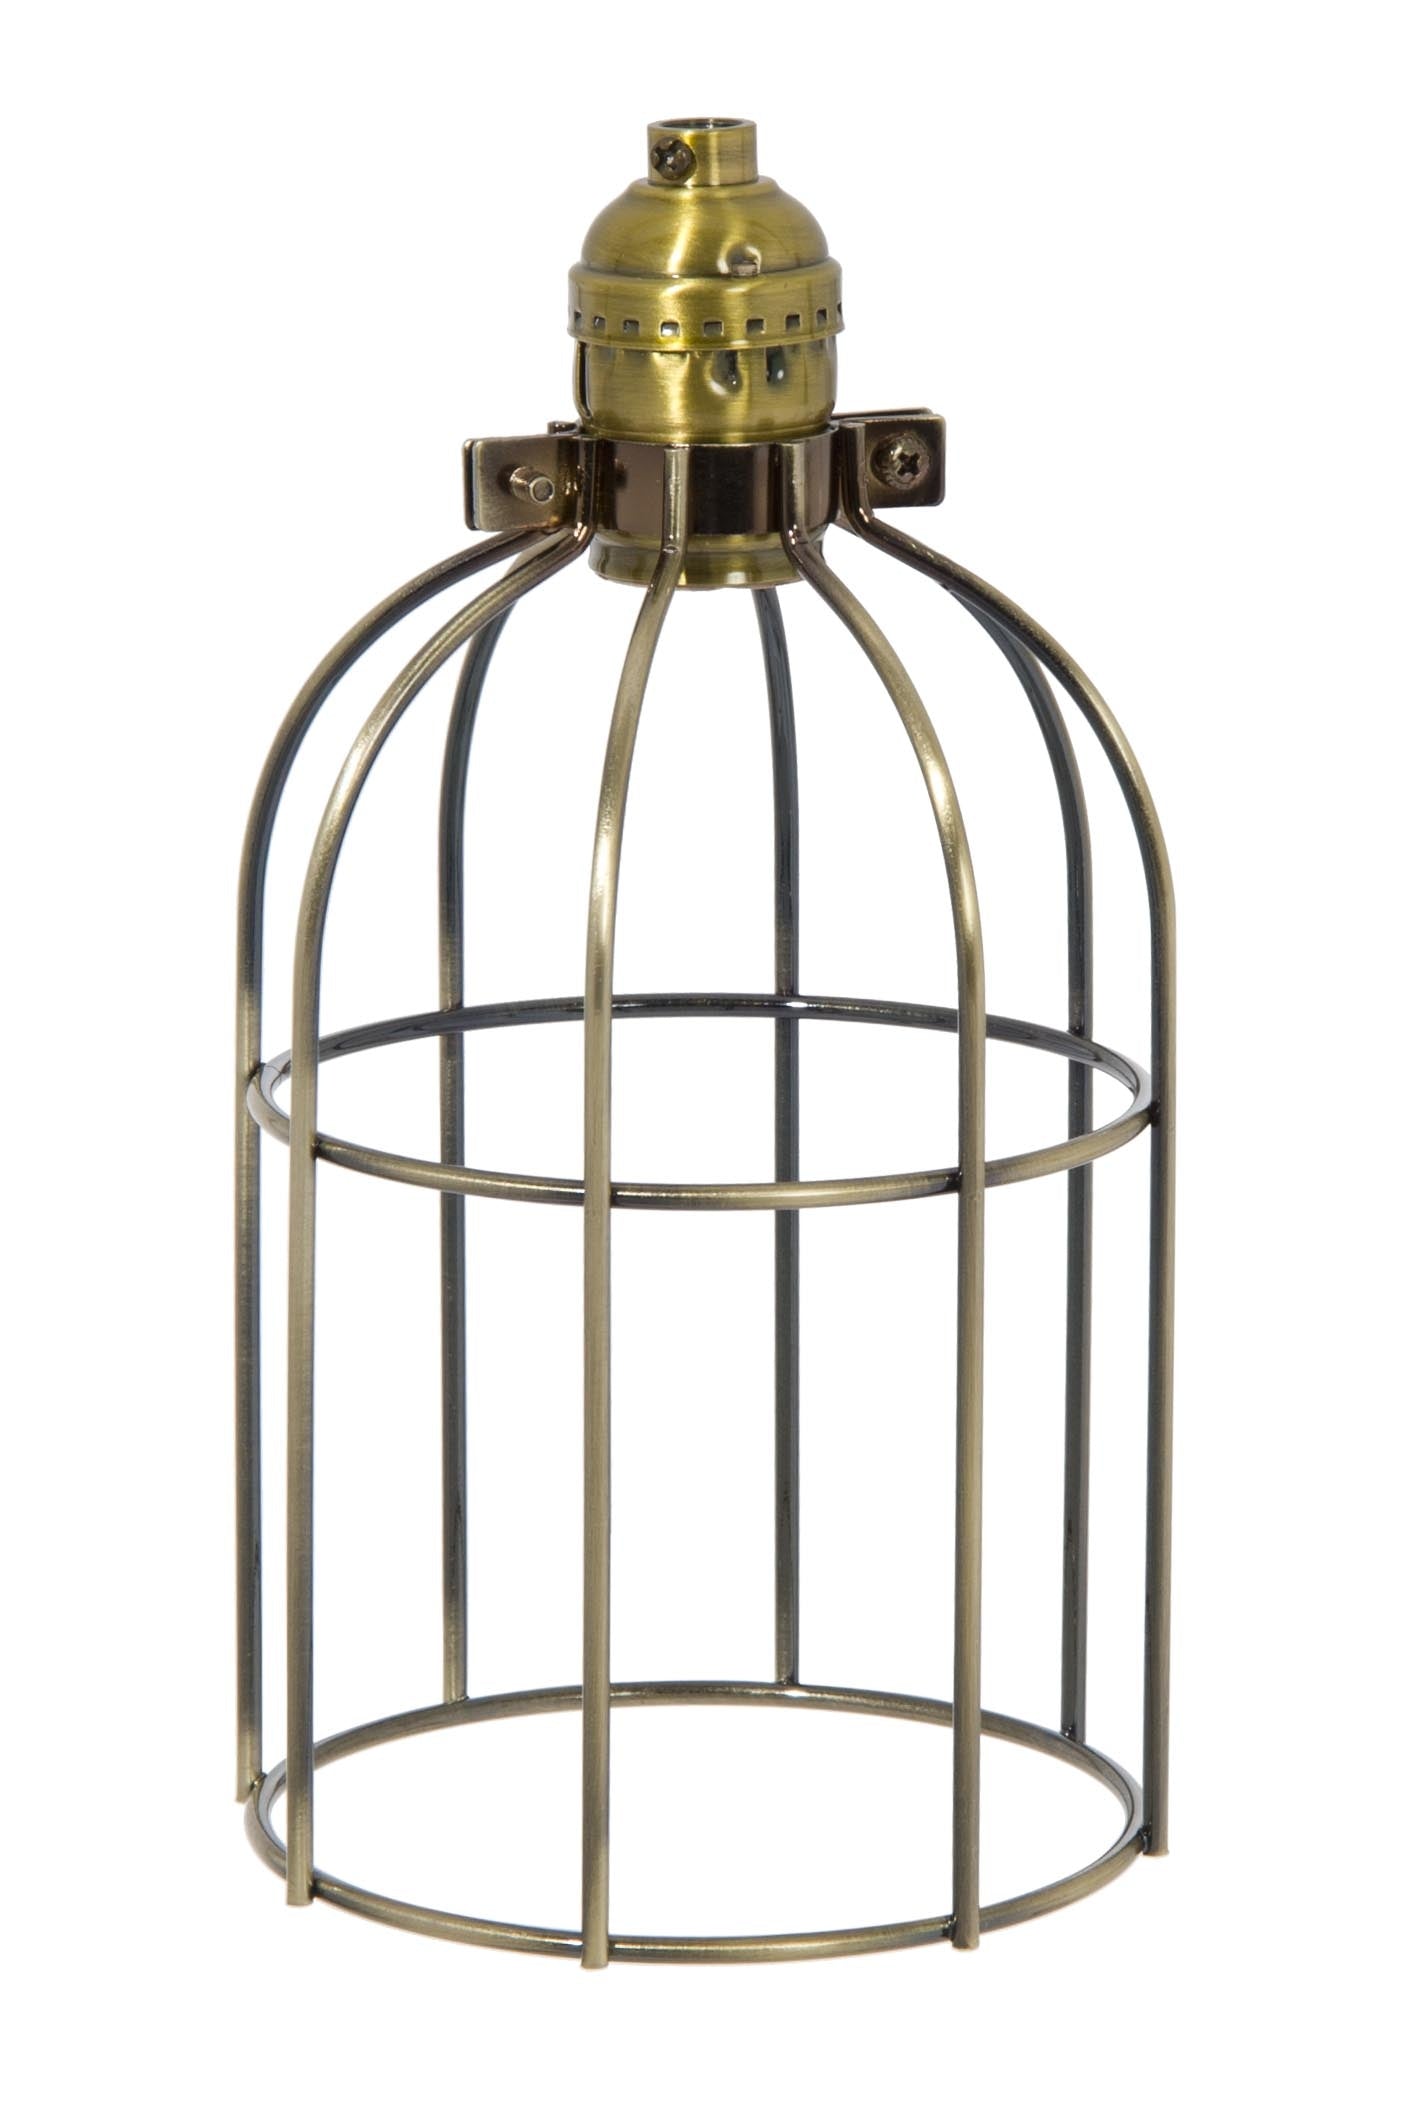 Antique Bronze Finish Steel Wire Bulb Cage, Clamp On Socket Type